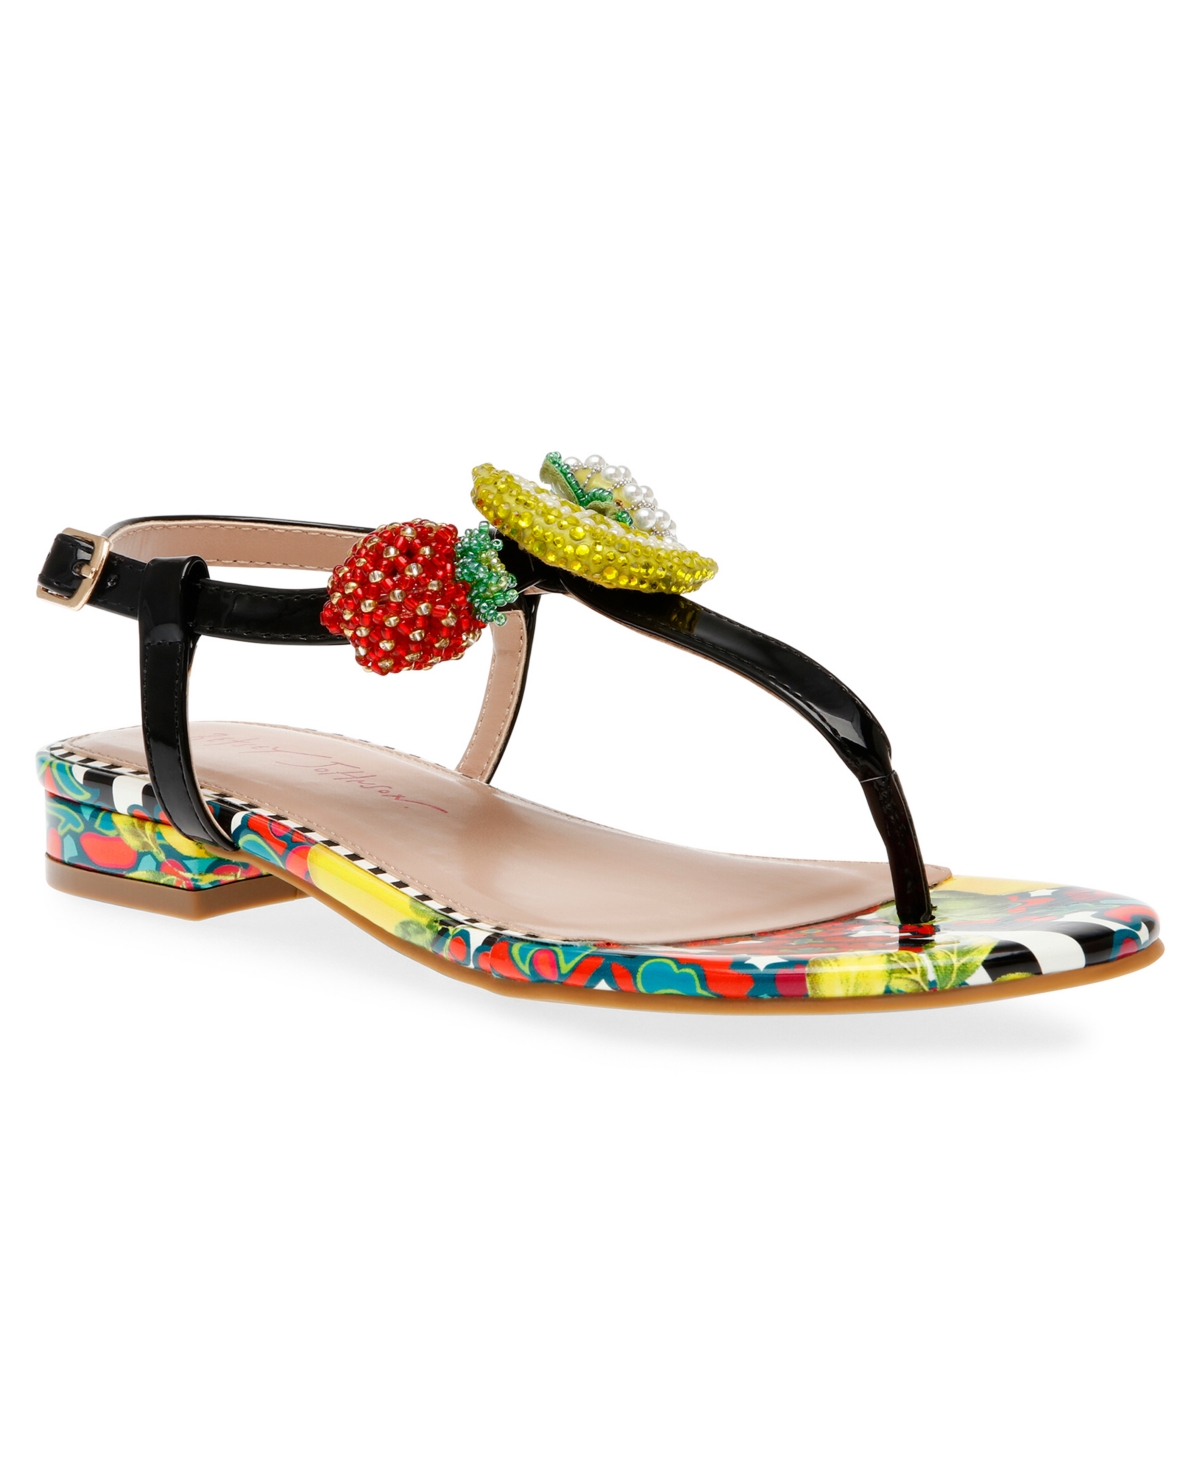 Women's Aniston Printed T-Thong Flat Sandals - Berry Multi